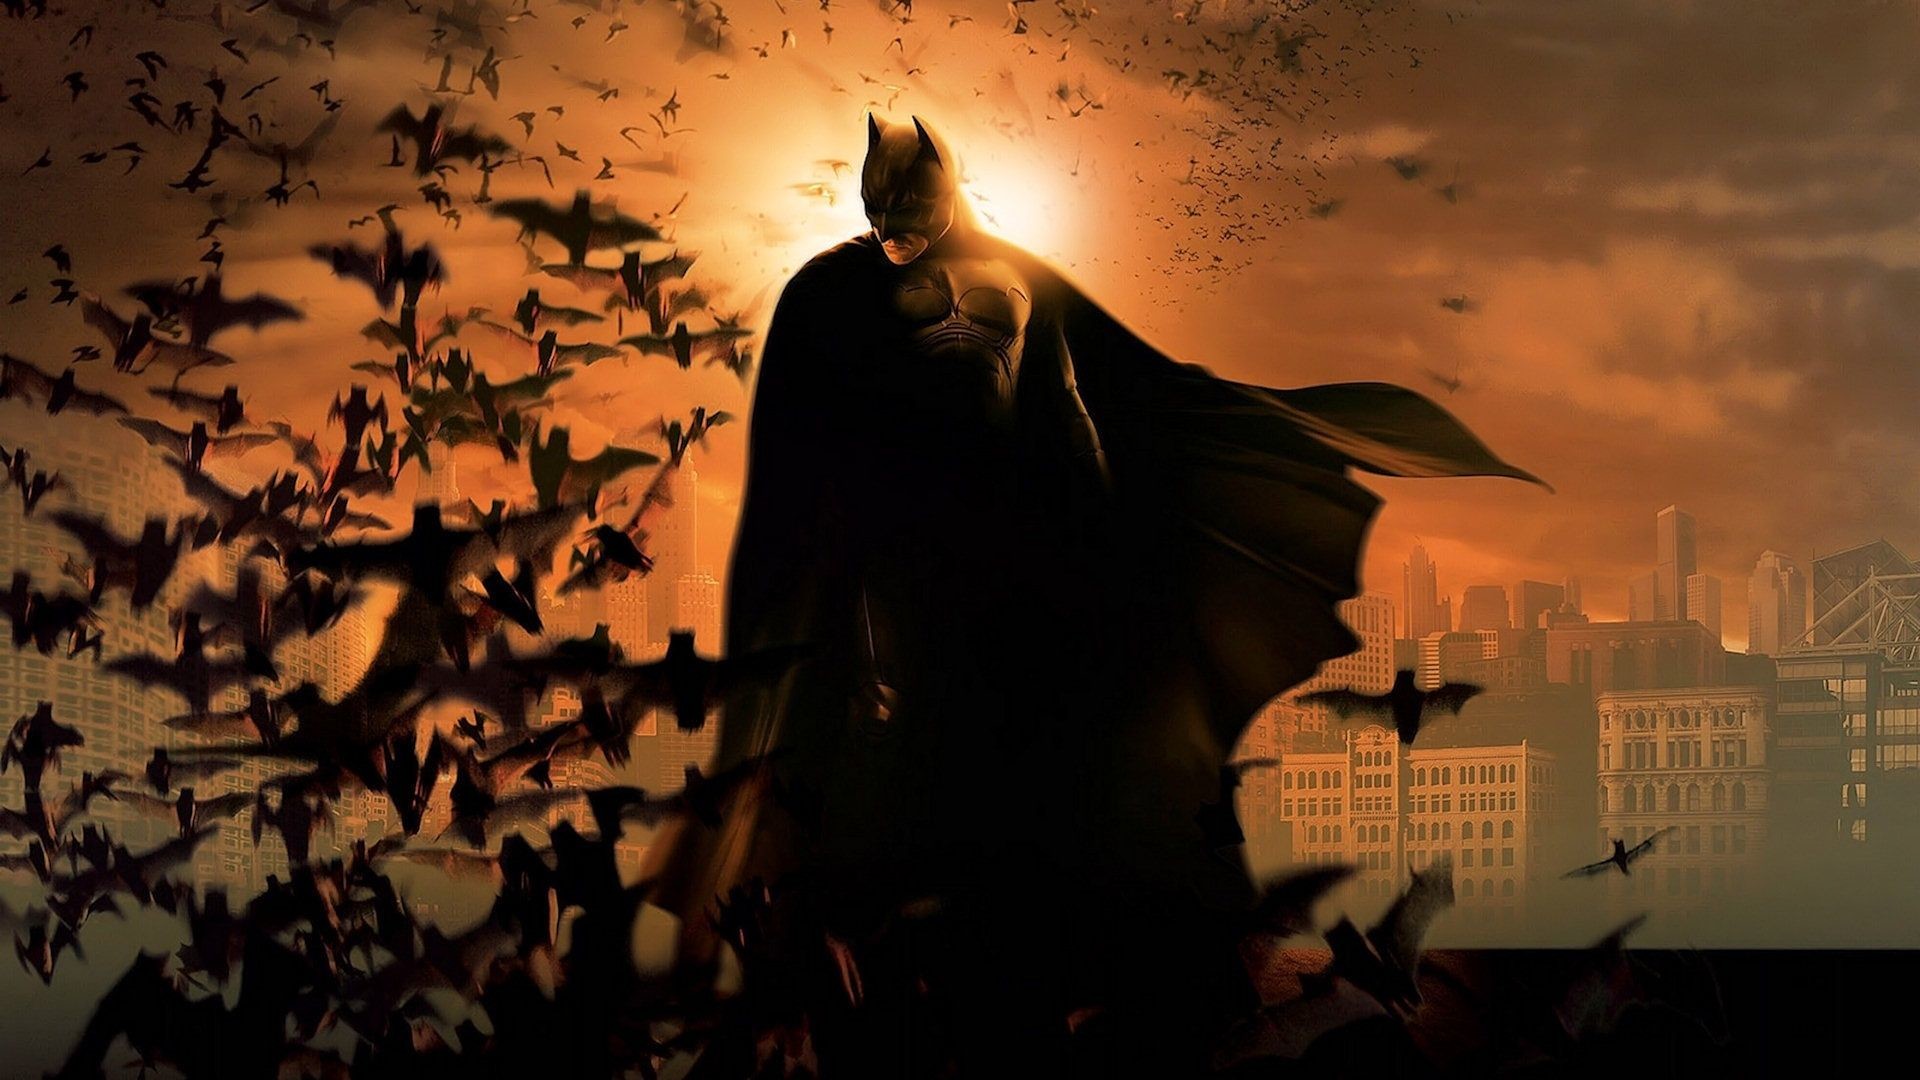 1920x1080 Collection Of Batman Hd Wallpaper On HDWallpapers